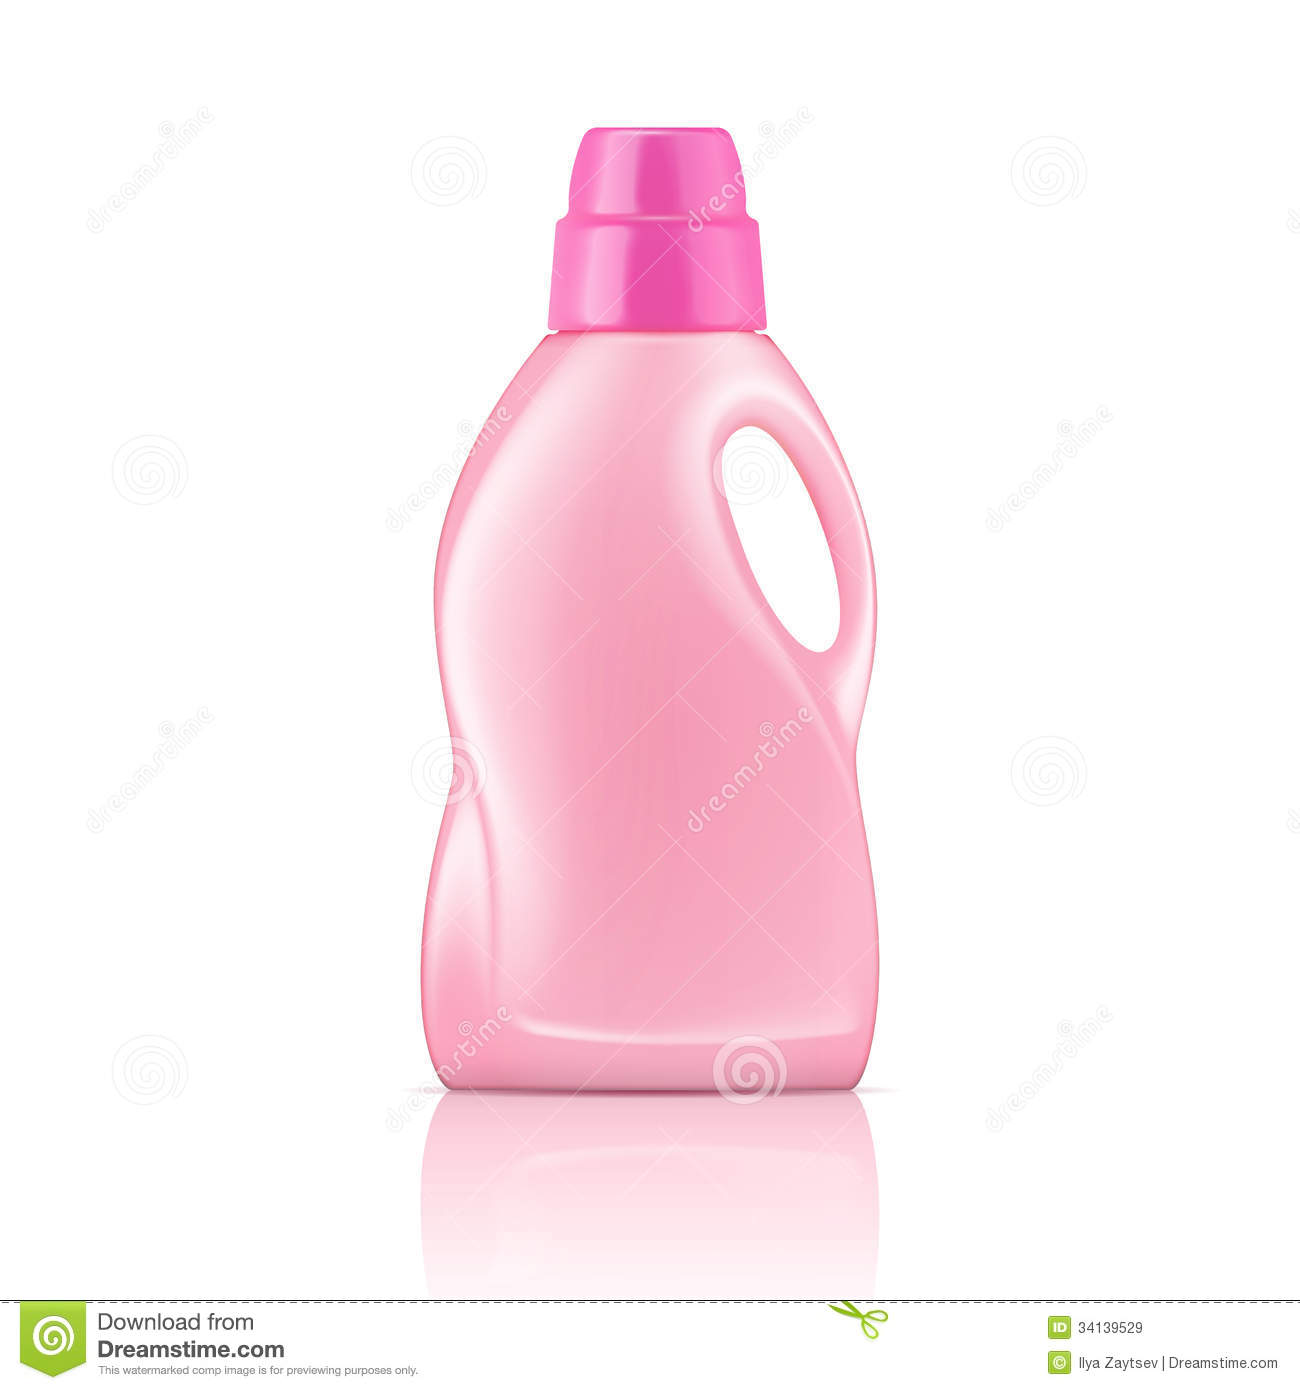 Pink Plastic Bottle For Liquid Laundry Detergent Cleaning Agent